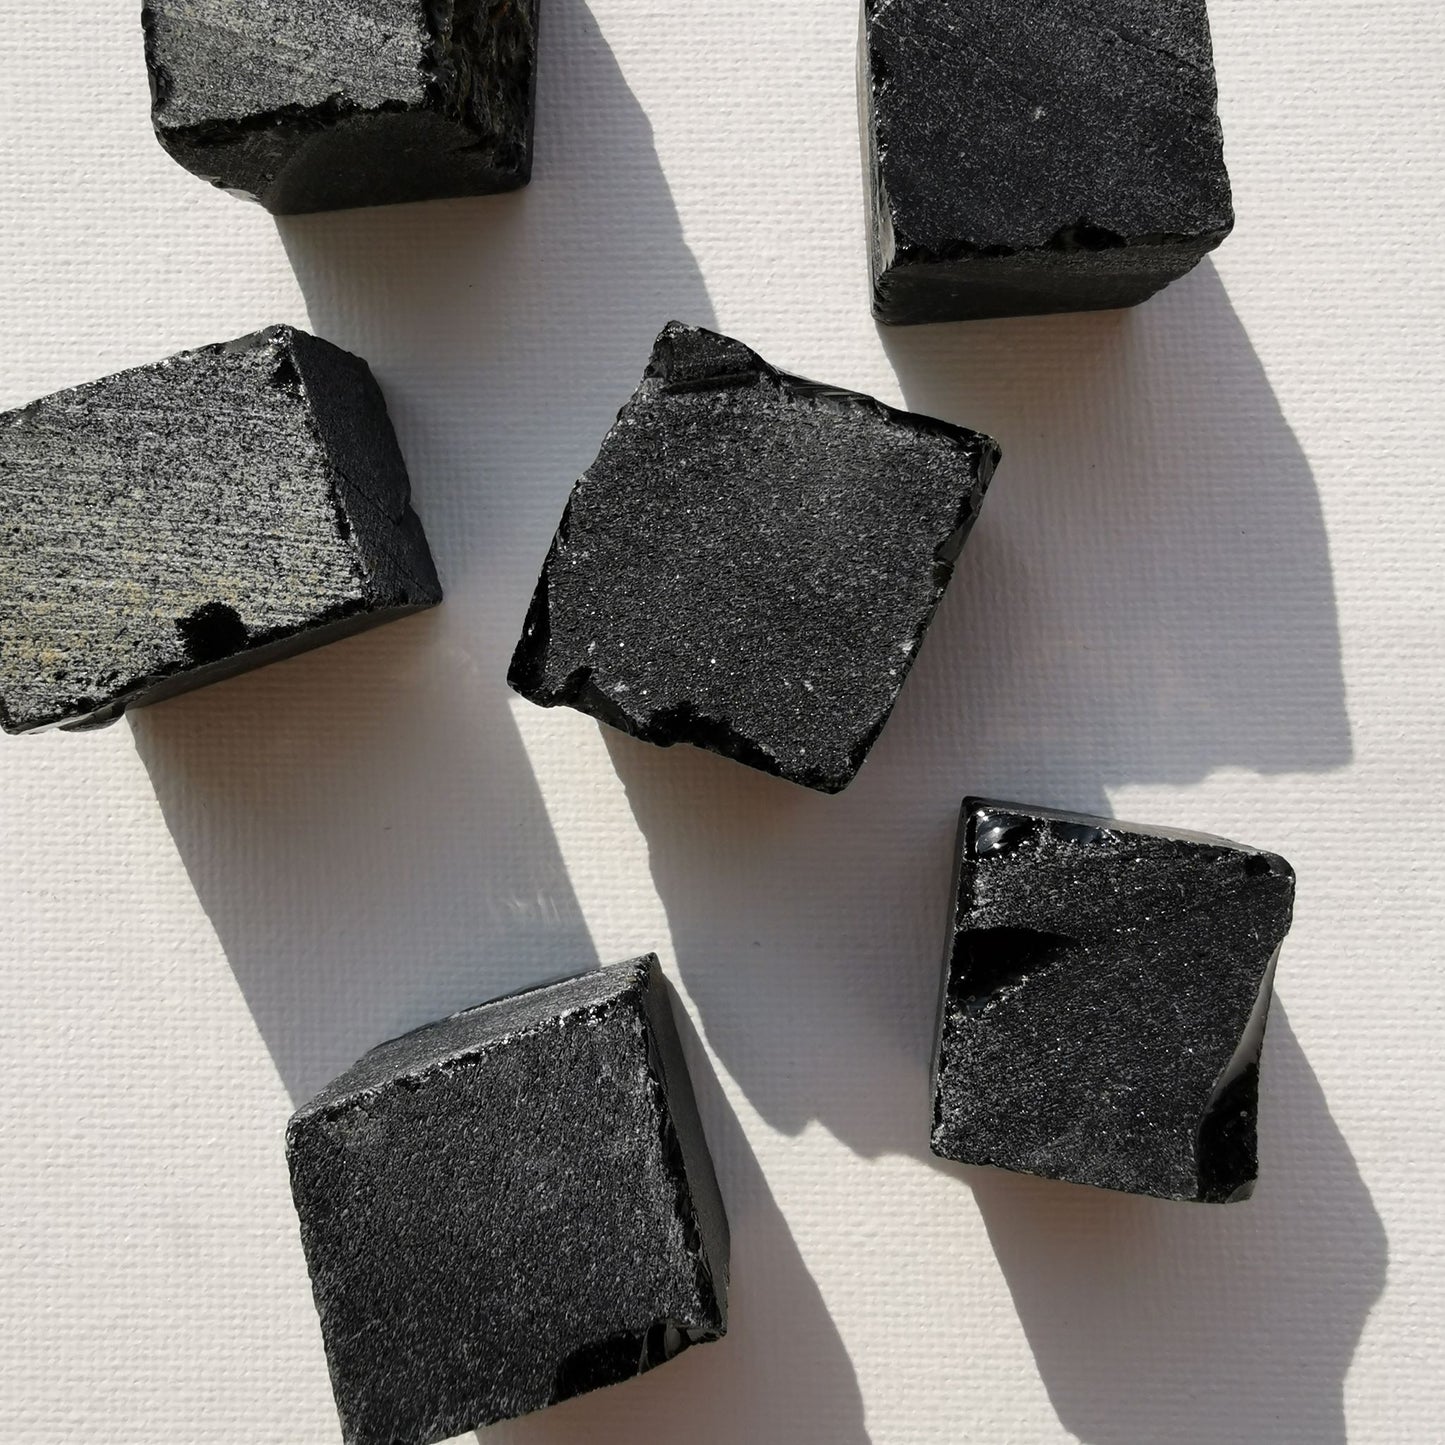  Dumi's Crystals | Square Rough Black Obsidian Crystals (Balance & Growth) | A collection of Square Rough Black Obsidian Crystals, reminders of your inner strength. Black Obsidian protects, grounds & promotes self-discovery. Scatter them in your home or workspace to create a safe and balanced environment, welcome emotional healing & growth. Embrace the power of Black Obsidian from Dumi's Crystals!